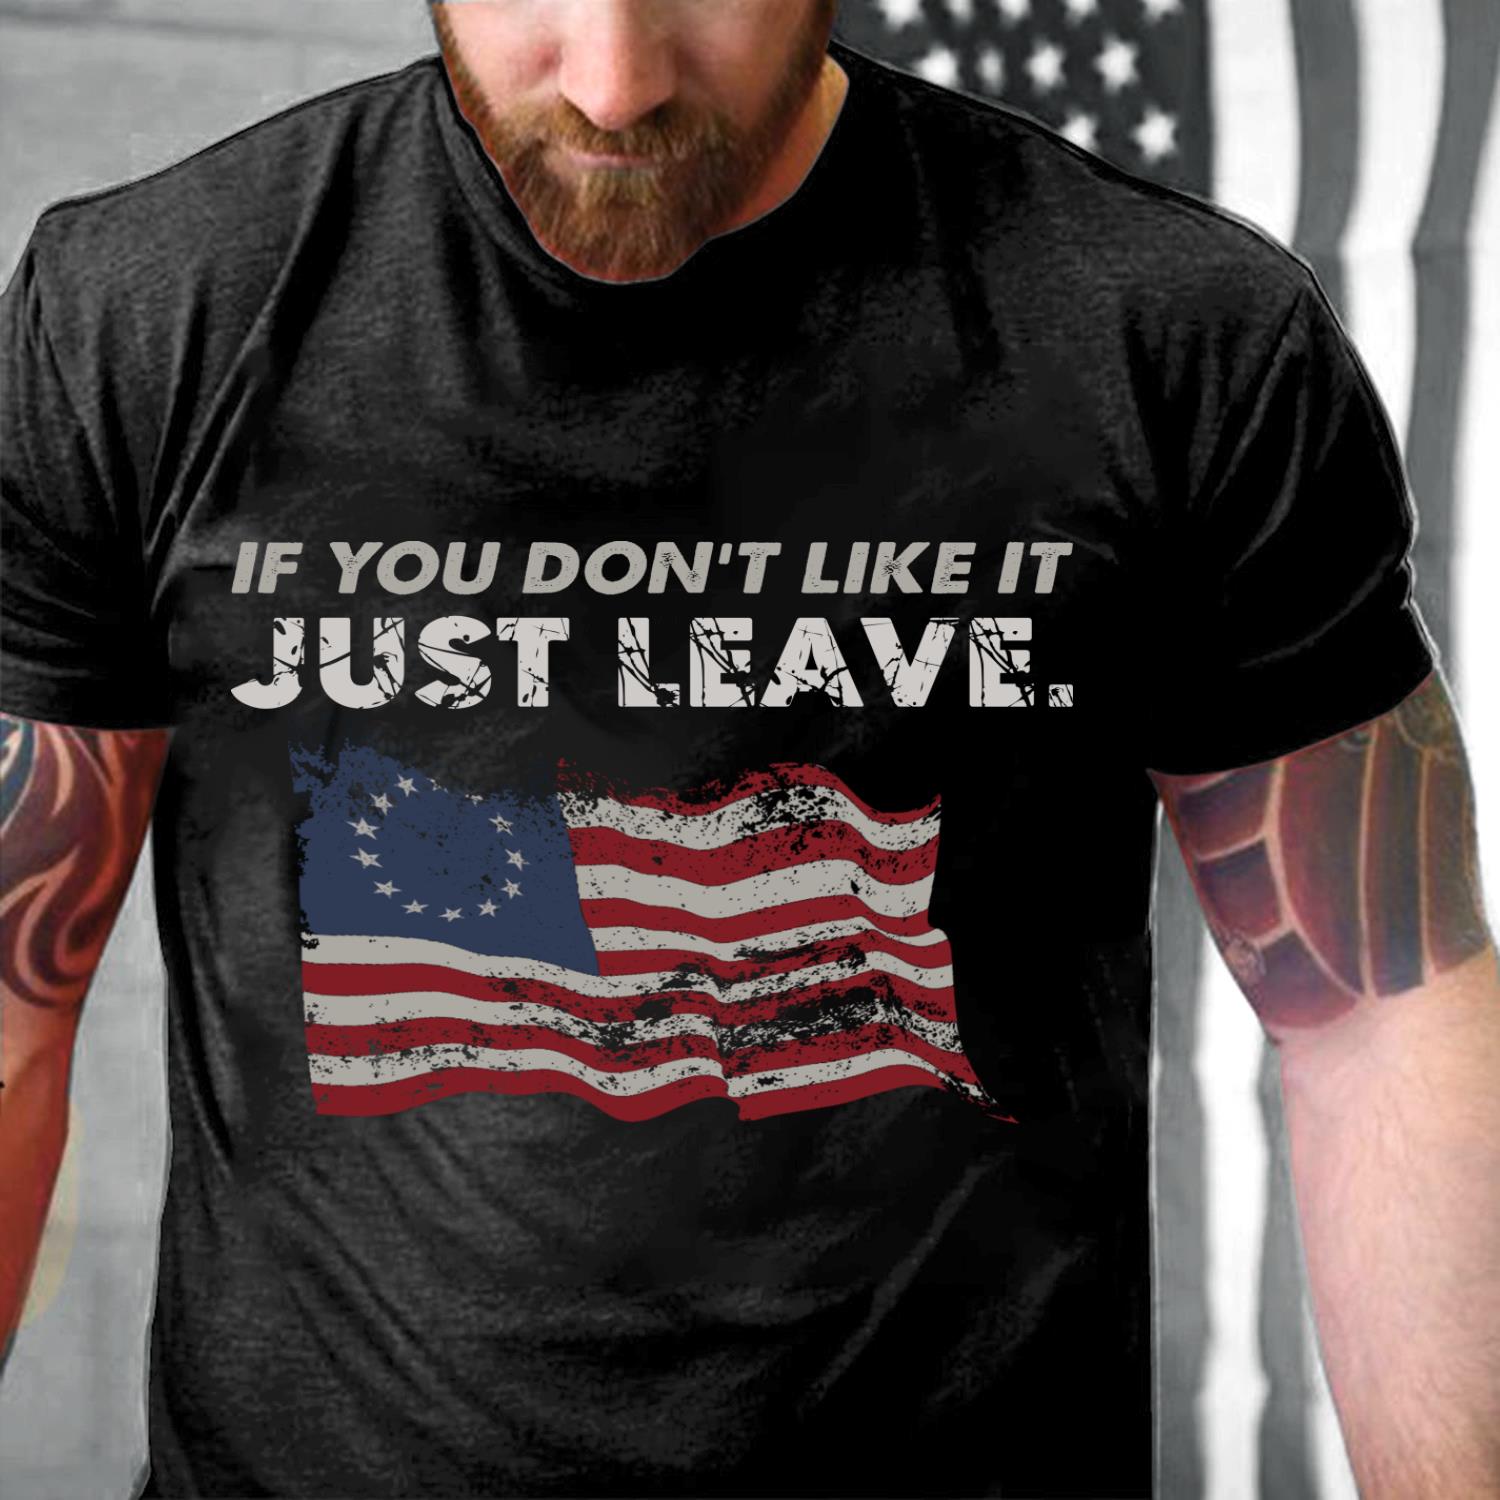 If You Don't Like It Just Leave T-Shirt